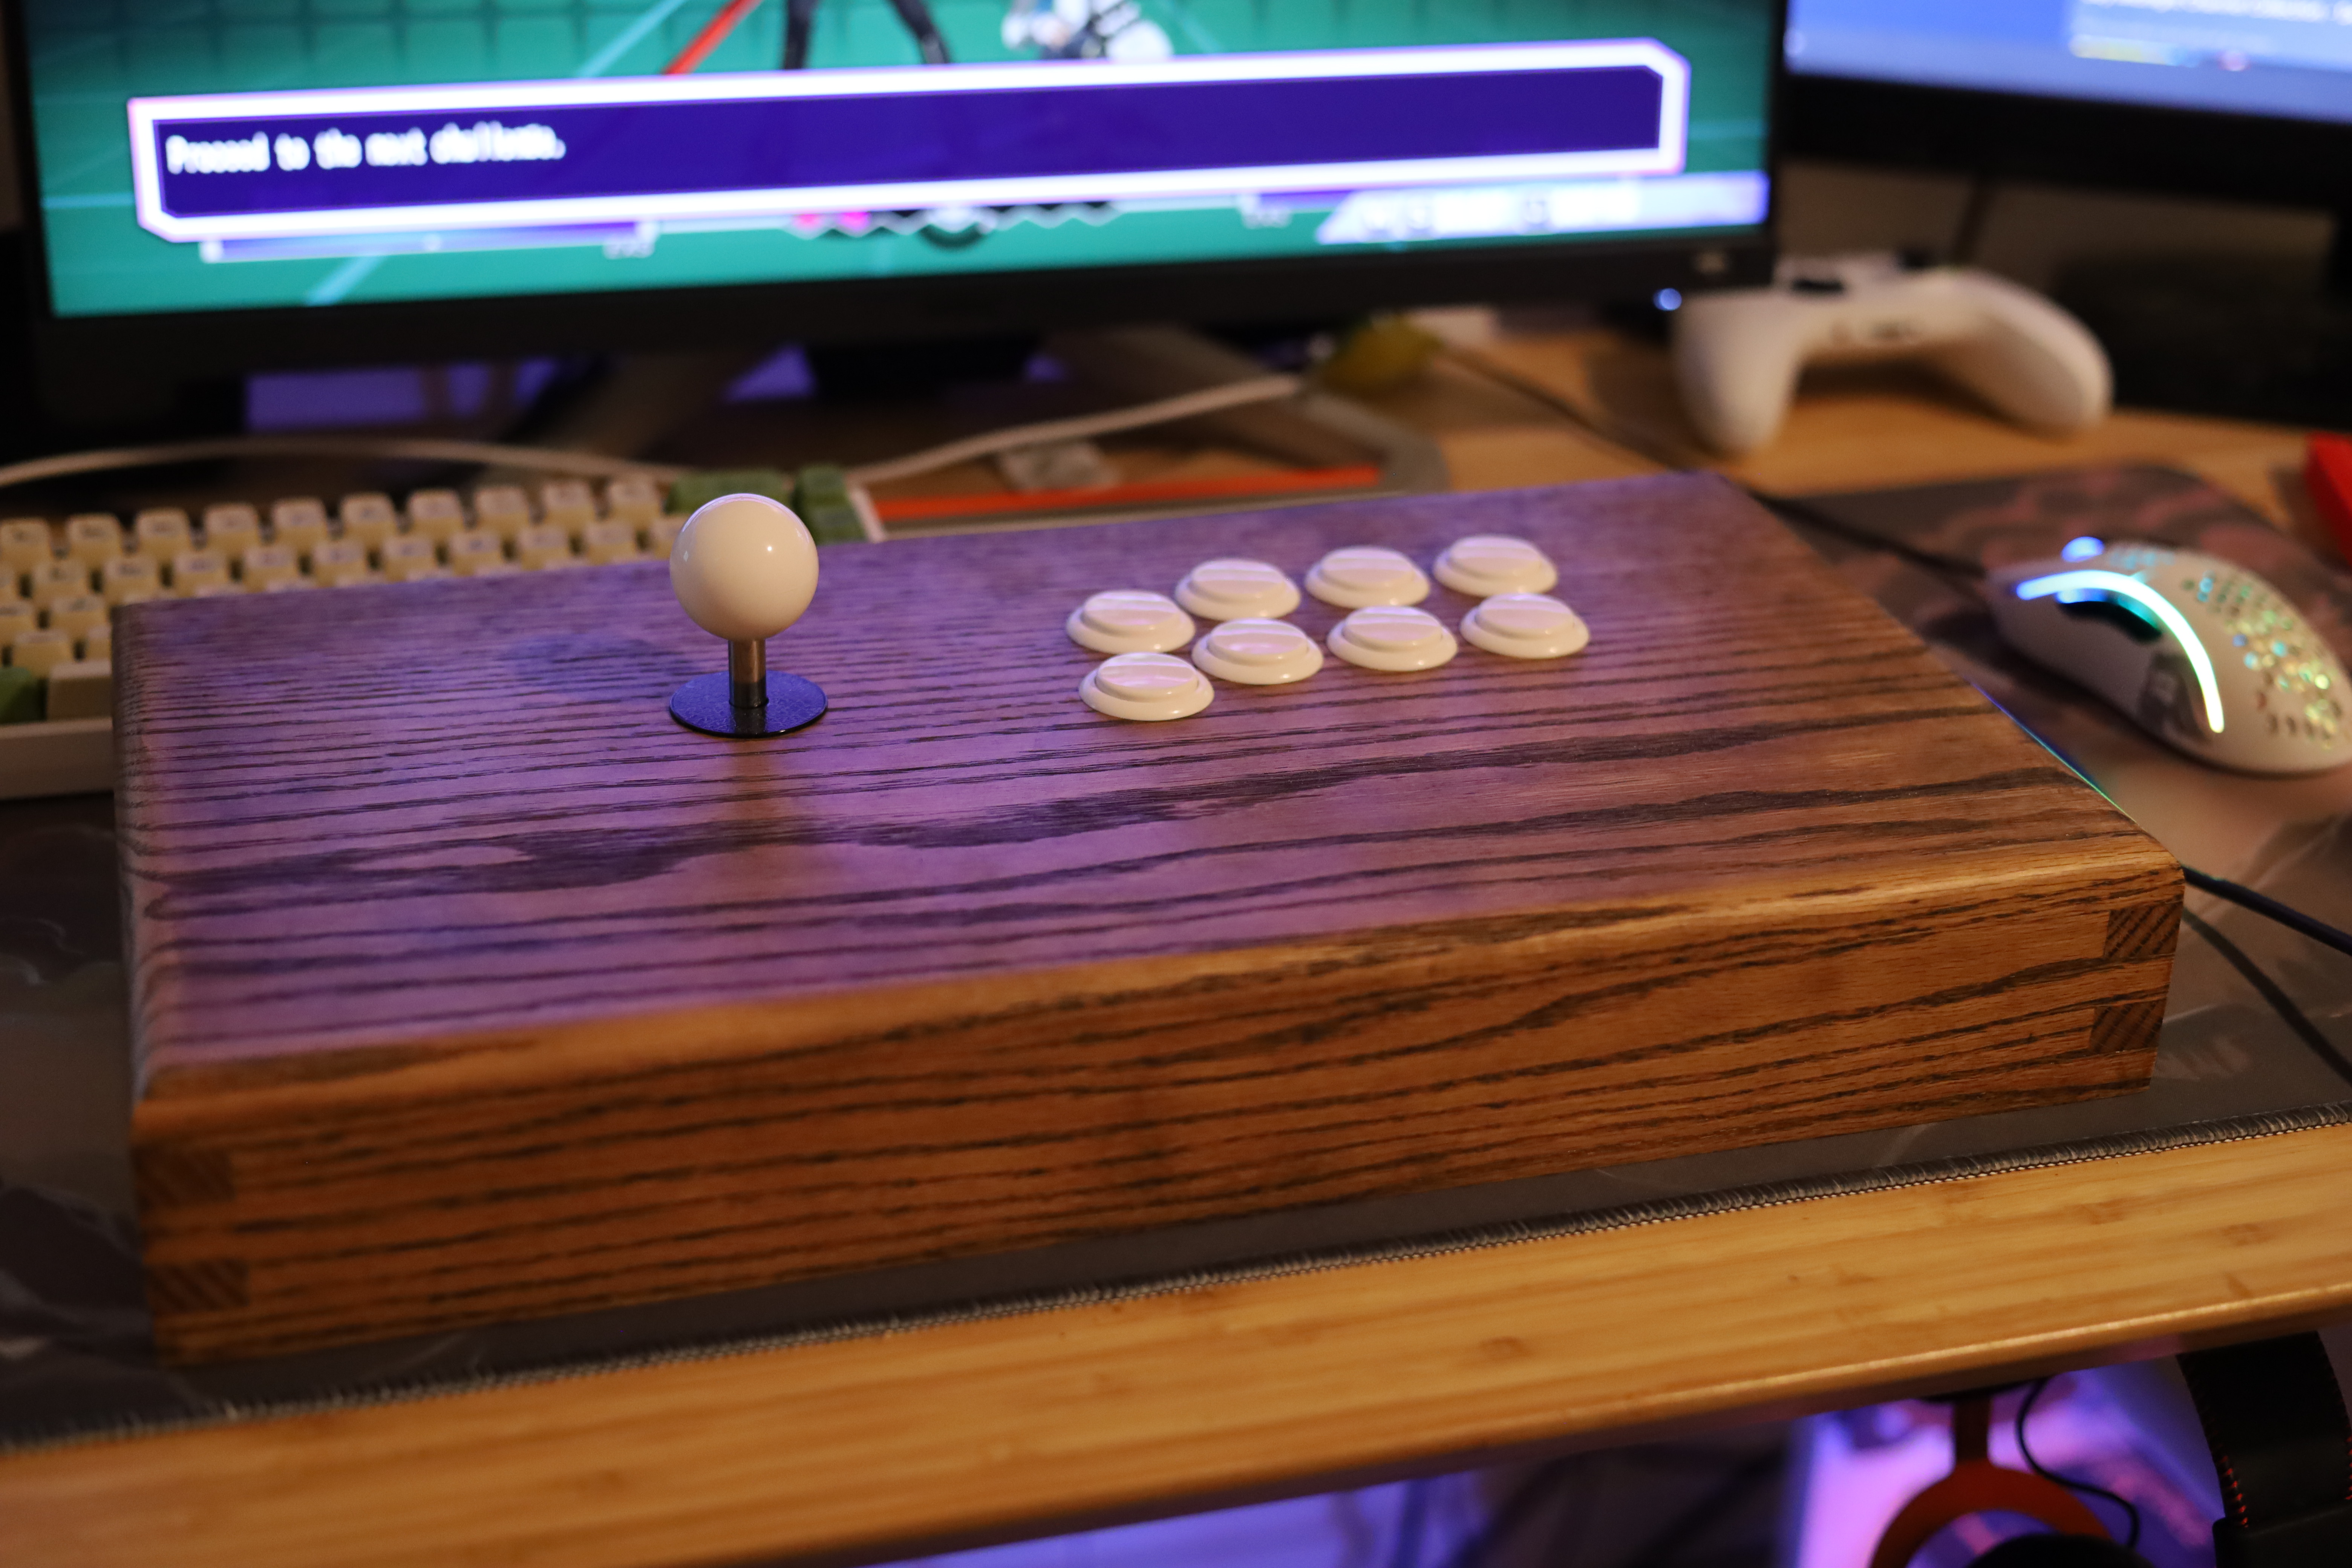 Fightstick ready for action